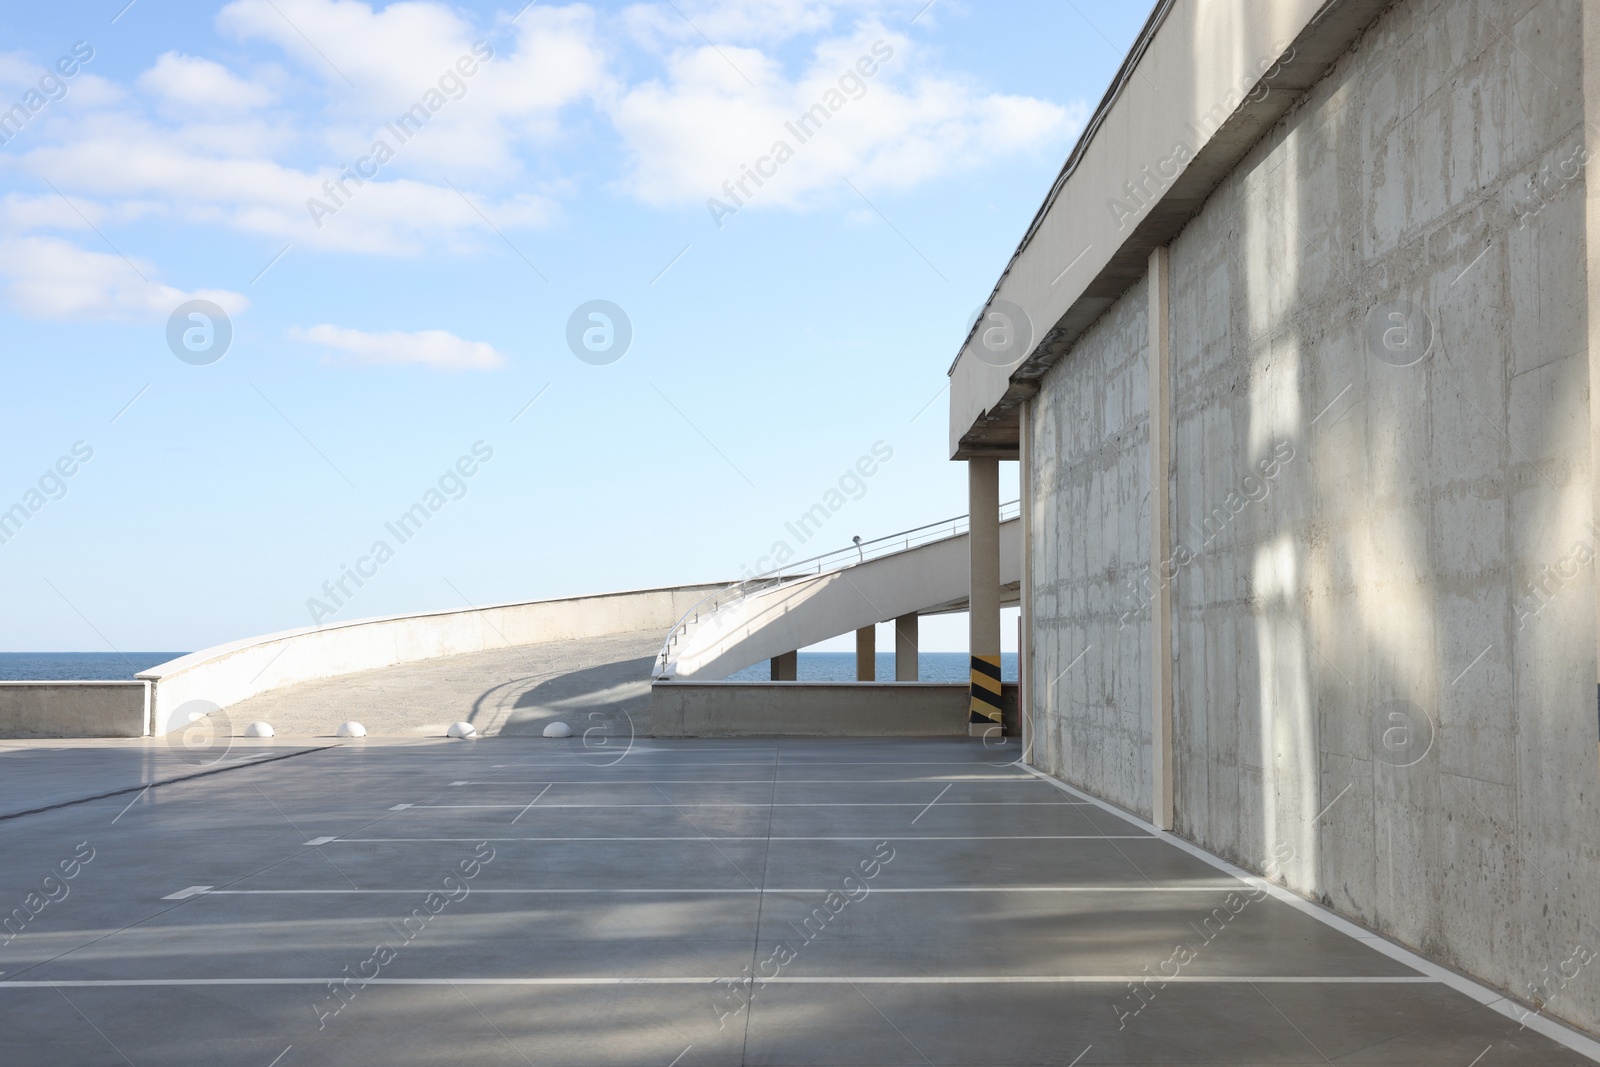 Photo of Empty outdoor car parking lot with ramp on sunny day